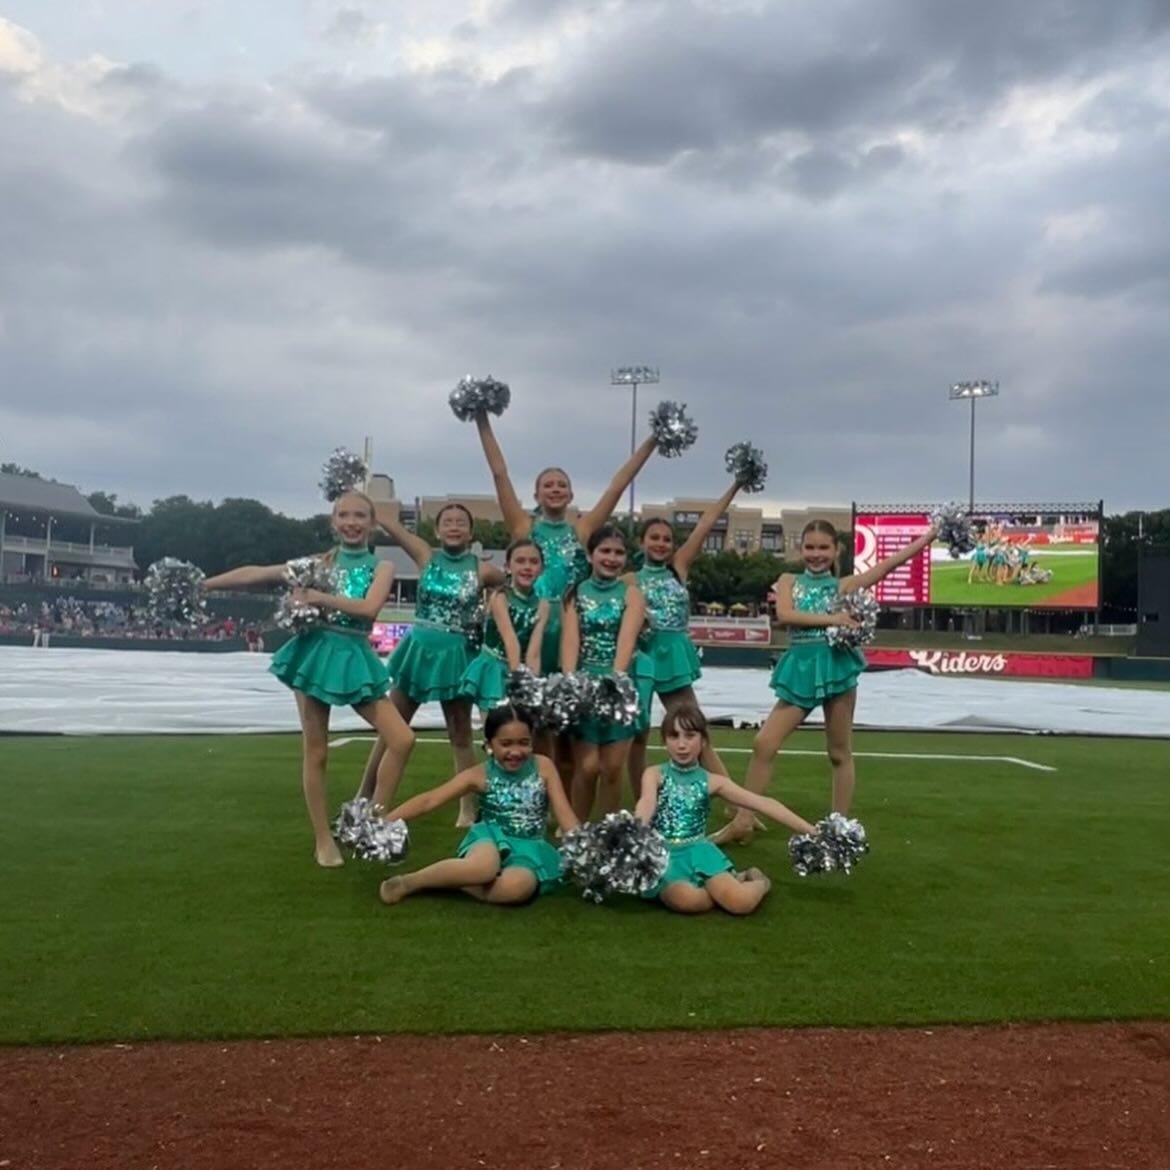 Our MDS Performance Team Juniors had a blast last weekend performing at the @friscoroughriders game! ⚾️ We love watching you shine!

#passionartistrydance #discovertheartistwithin #allendancestudio #mckinneydancestudio #friscodancestudio #thedancestu